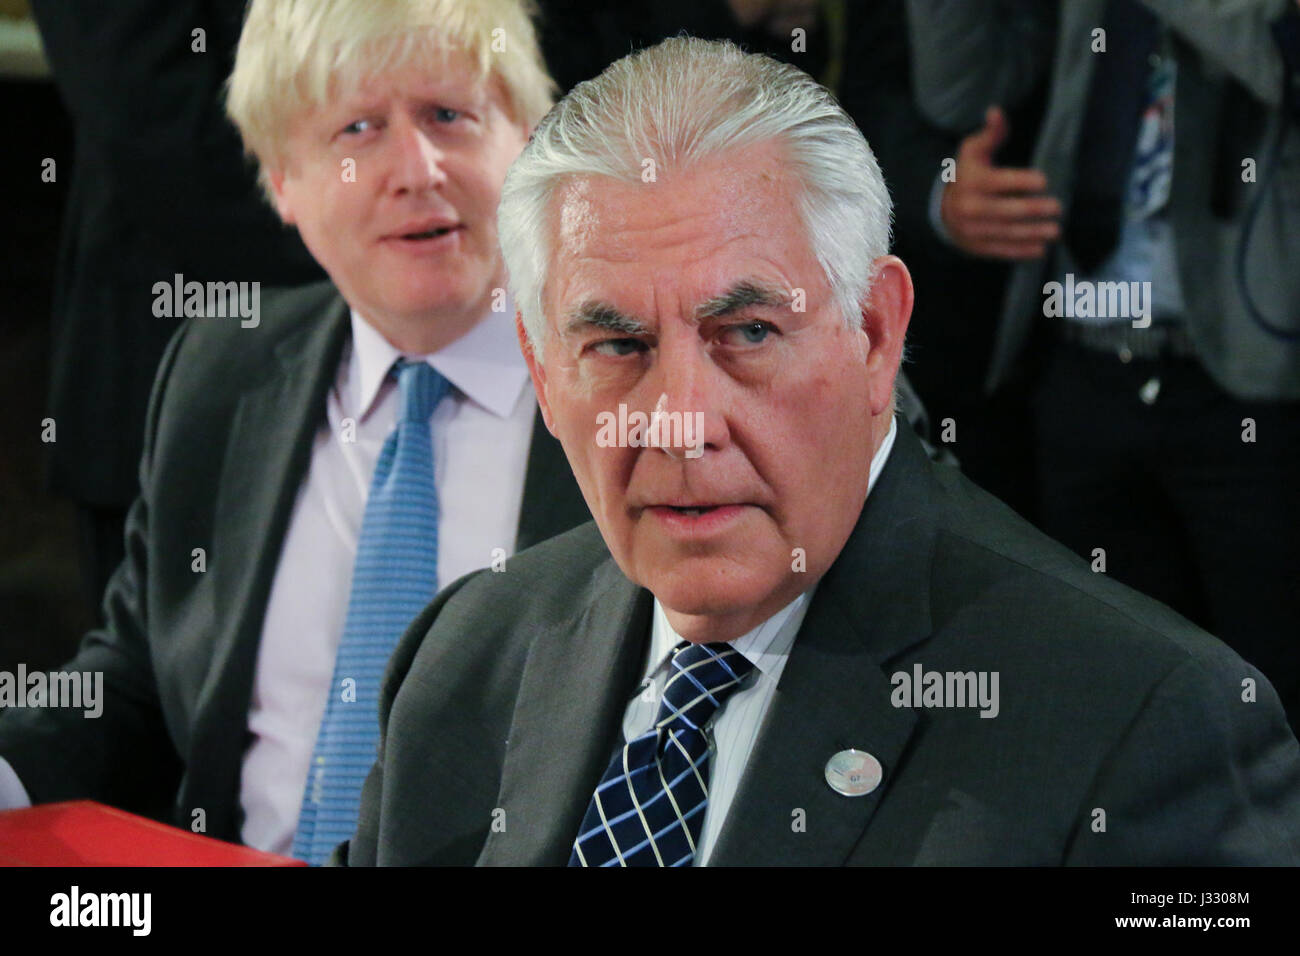 U.S. Secretary of State Rex Tillerson and British Foreign Secretary Boris Johnson participate in Day 2 of the G7 Ministerial Working Session with counterparts from Japan, Germany, Italy, France, Canada, and the European Union, in Lucca, Italy, on April 11, 2017. Stock Photo